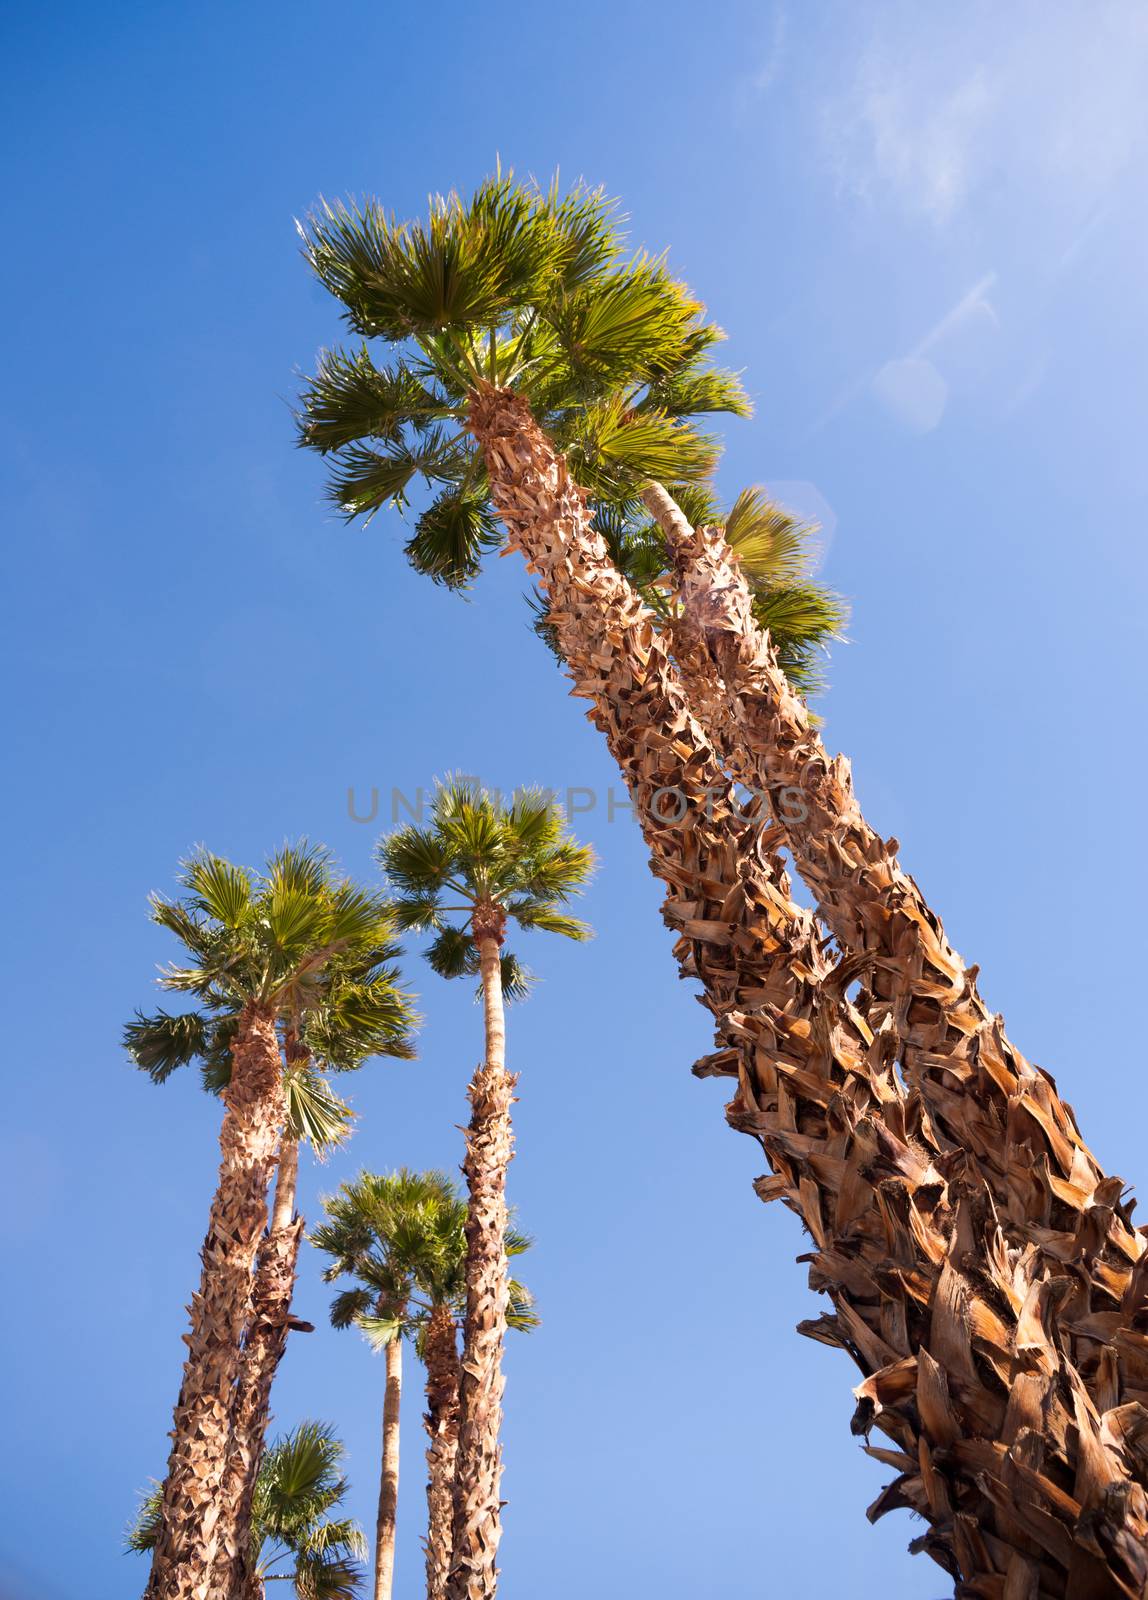 Blue skies make a good background for tropical palm trees in Palm Springs